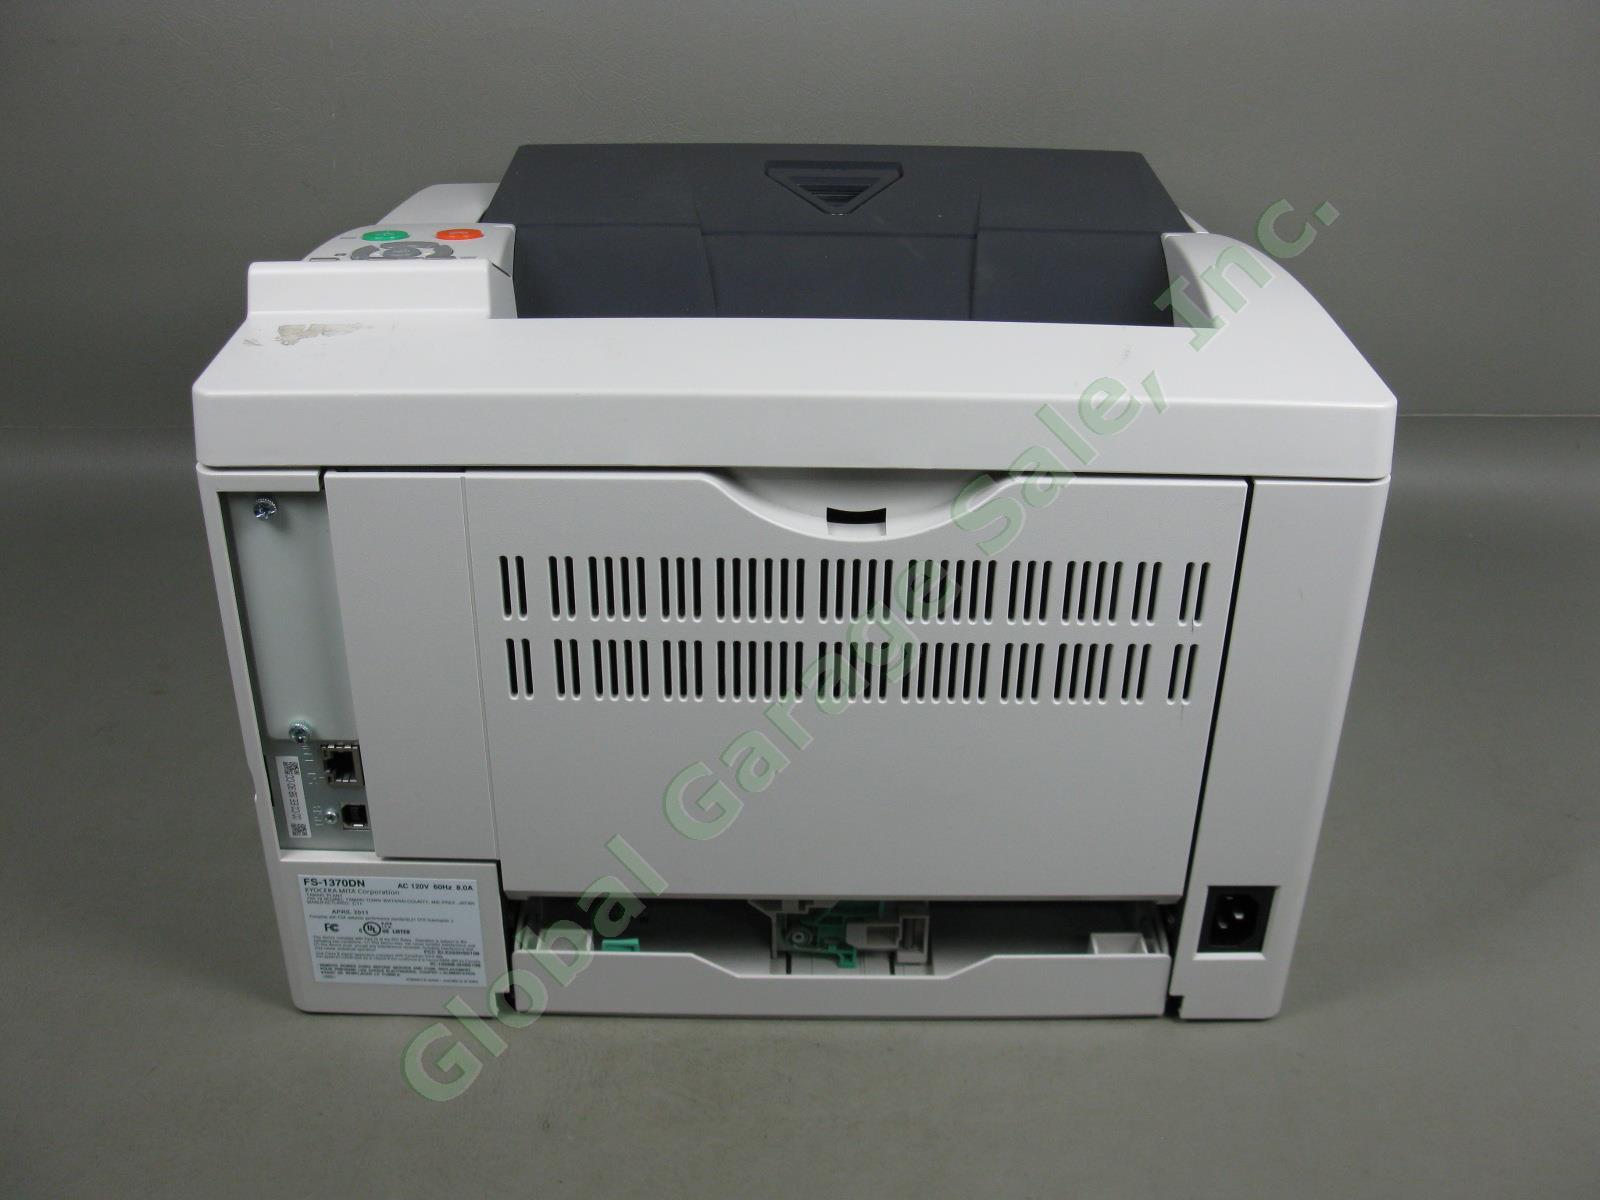 Kyocera Ecosys FS1370DN Workgroup Network Laser Printer Exc Cond! 19,510 Pages 4